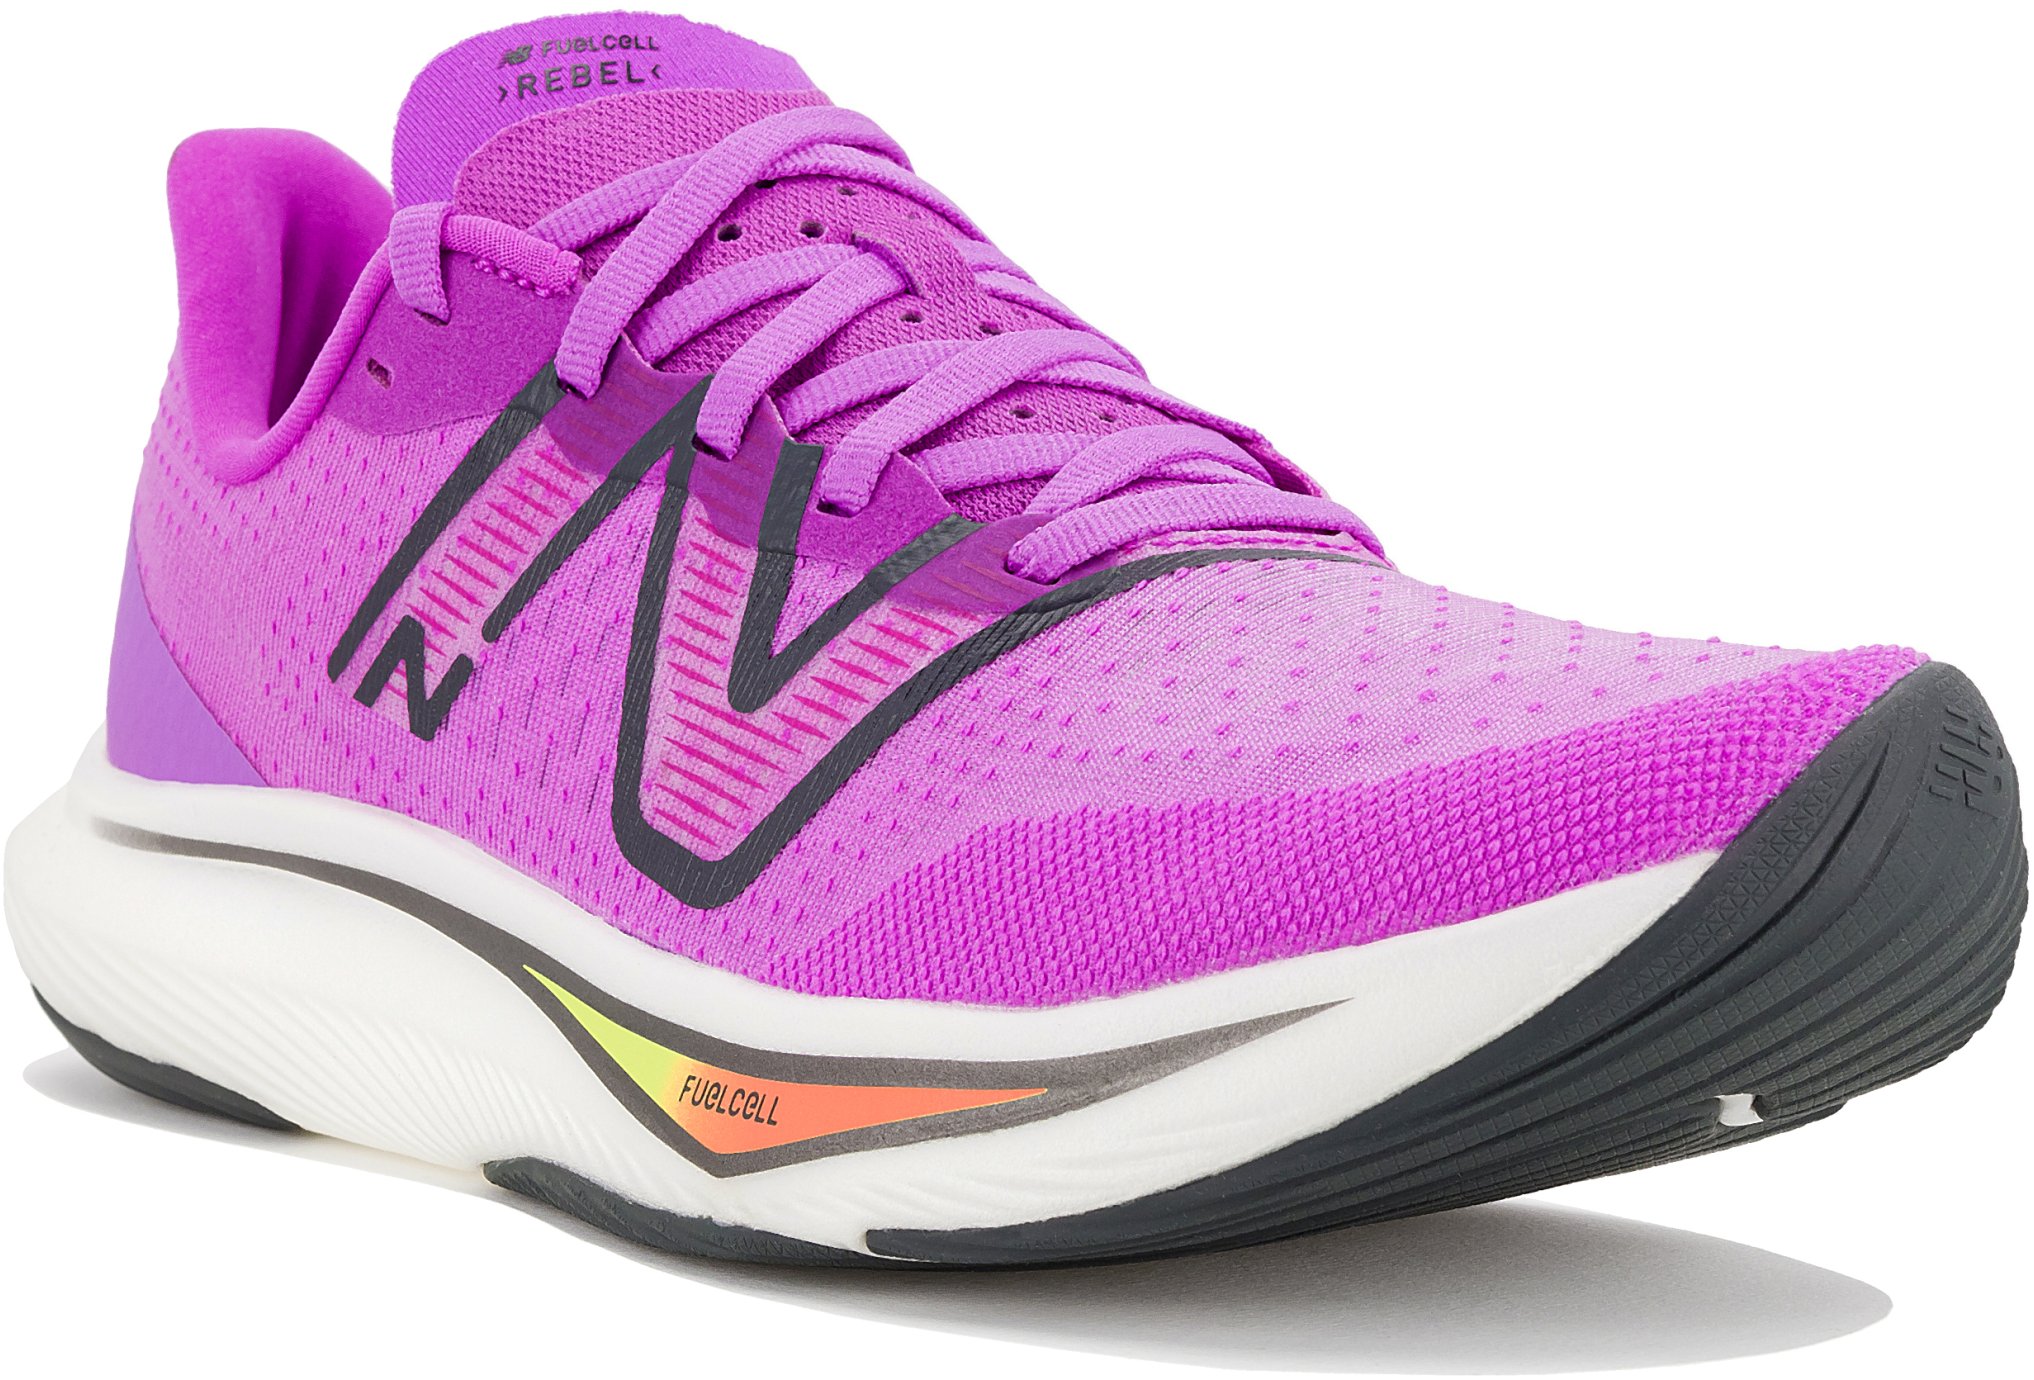 New Balance FuelCell Rebel V3 W Chaussures running femme